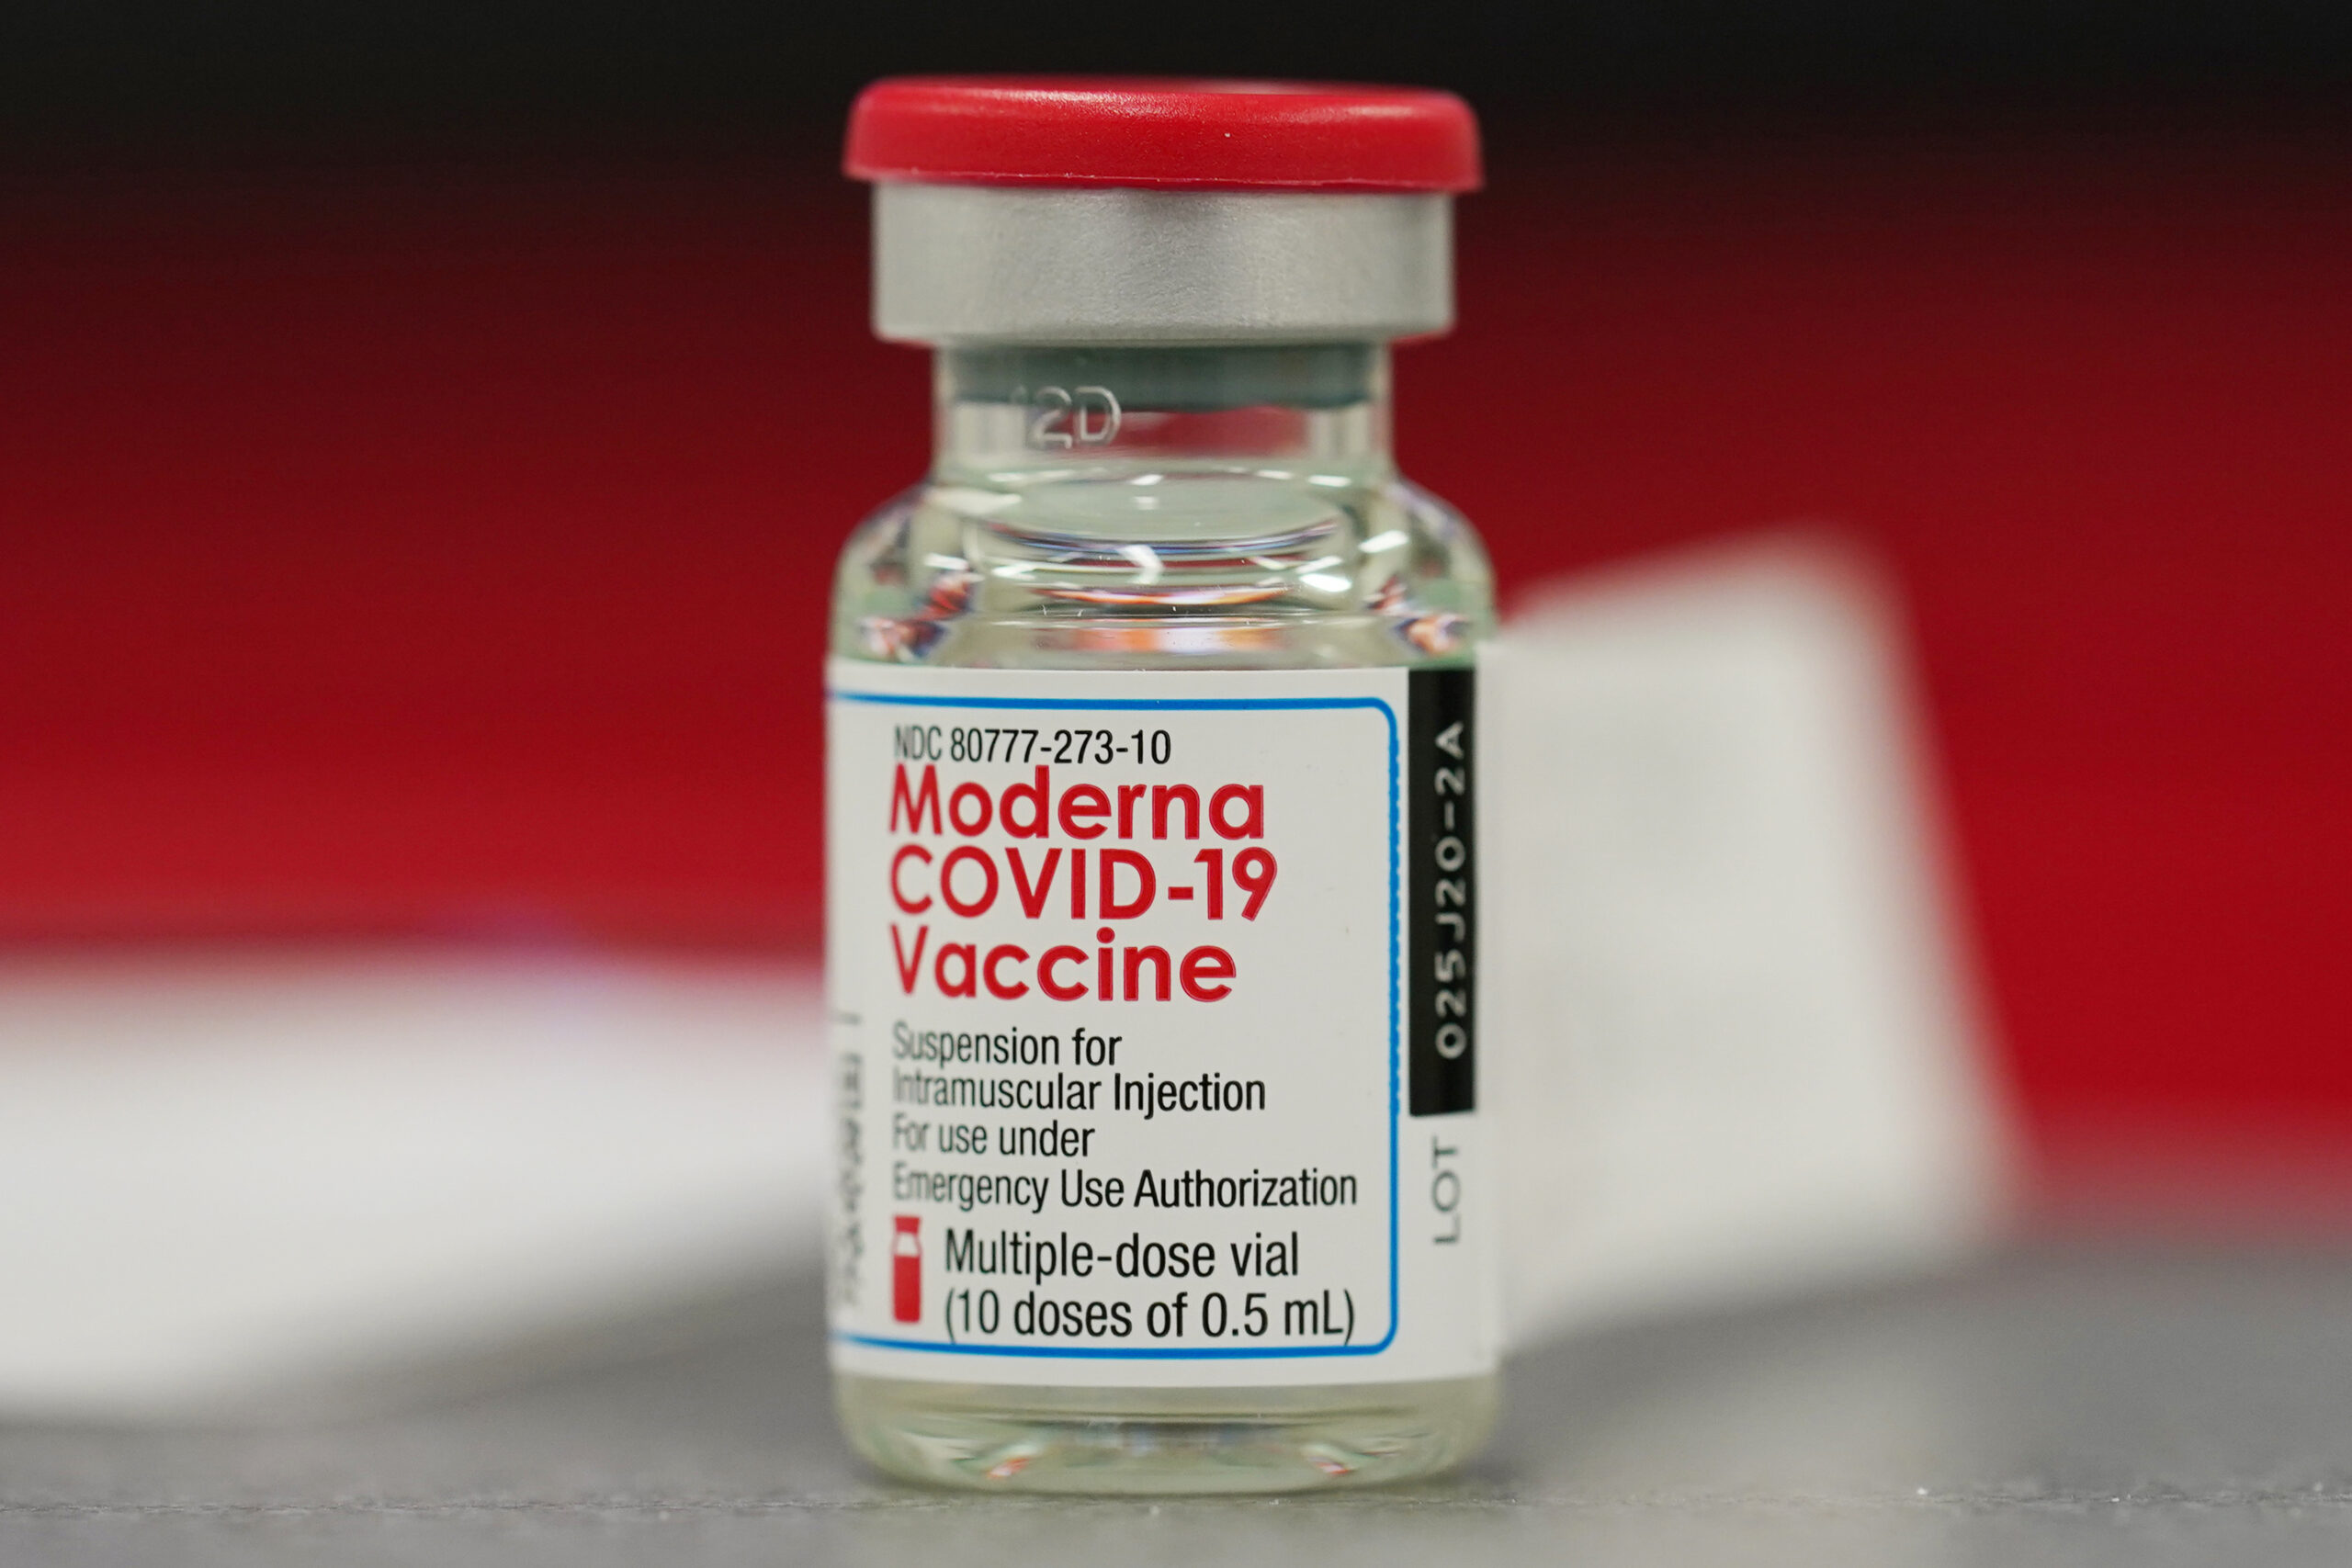 FILE - This Dec. 23, 2020 file photo shows a vial of the Moderna COVID-19 vaccine in the first round of staff vaccinations at a hospital in Denver. Federal regulators are expected to authorize the mixing and matching of COVID-19 booster shots this week in an effort to provide flexibility for those seeking to maintain protection against the coronavirus. The upcoming announcement by the Food and Drug Administration is likely to come along with authorization for boosters of the Moderna and Johnson & Johnson shots. (AP Photo/David Zalubowski, File)